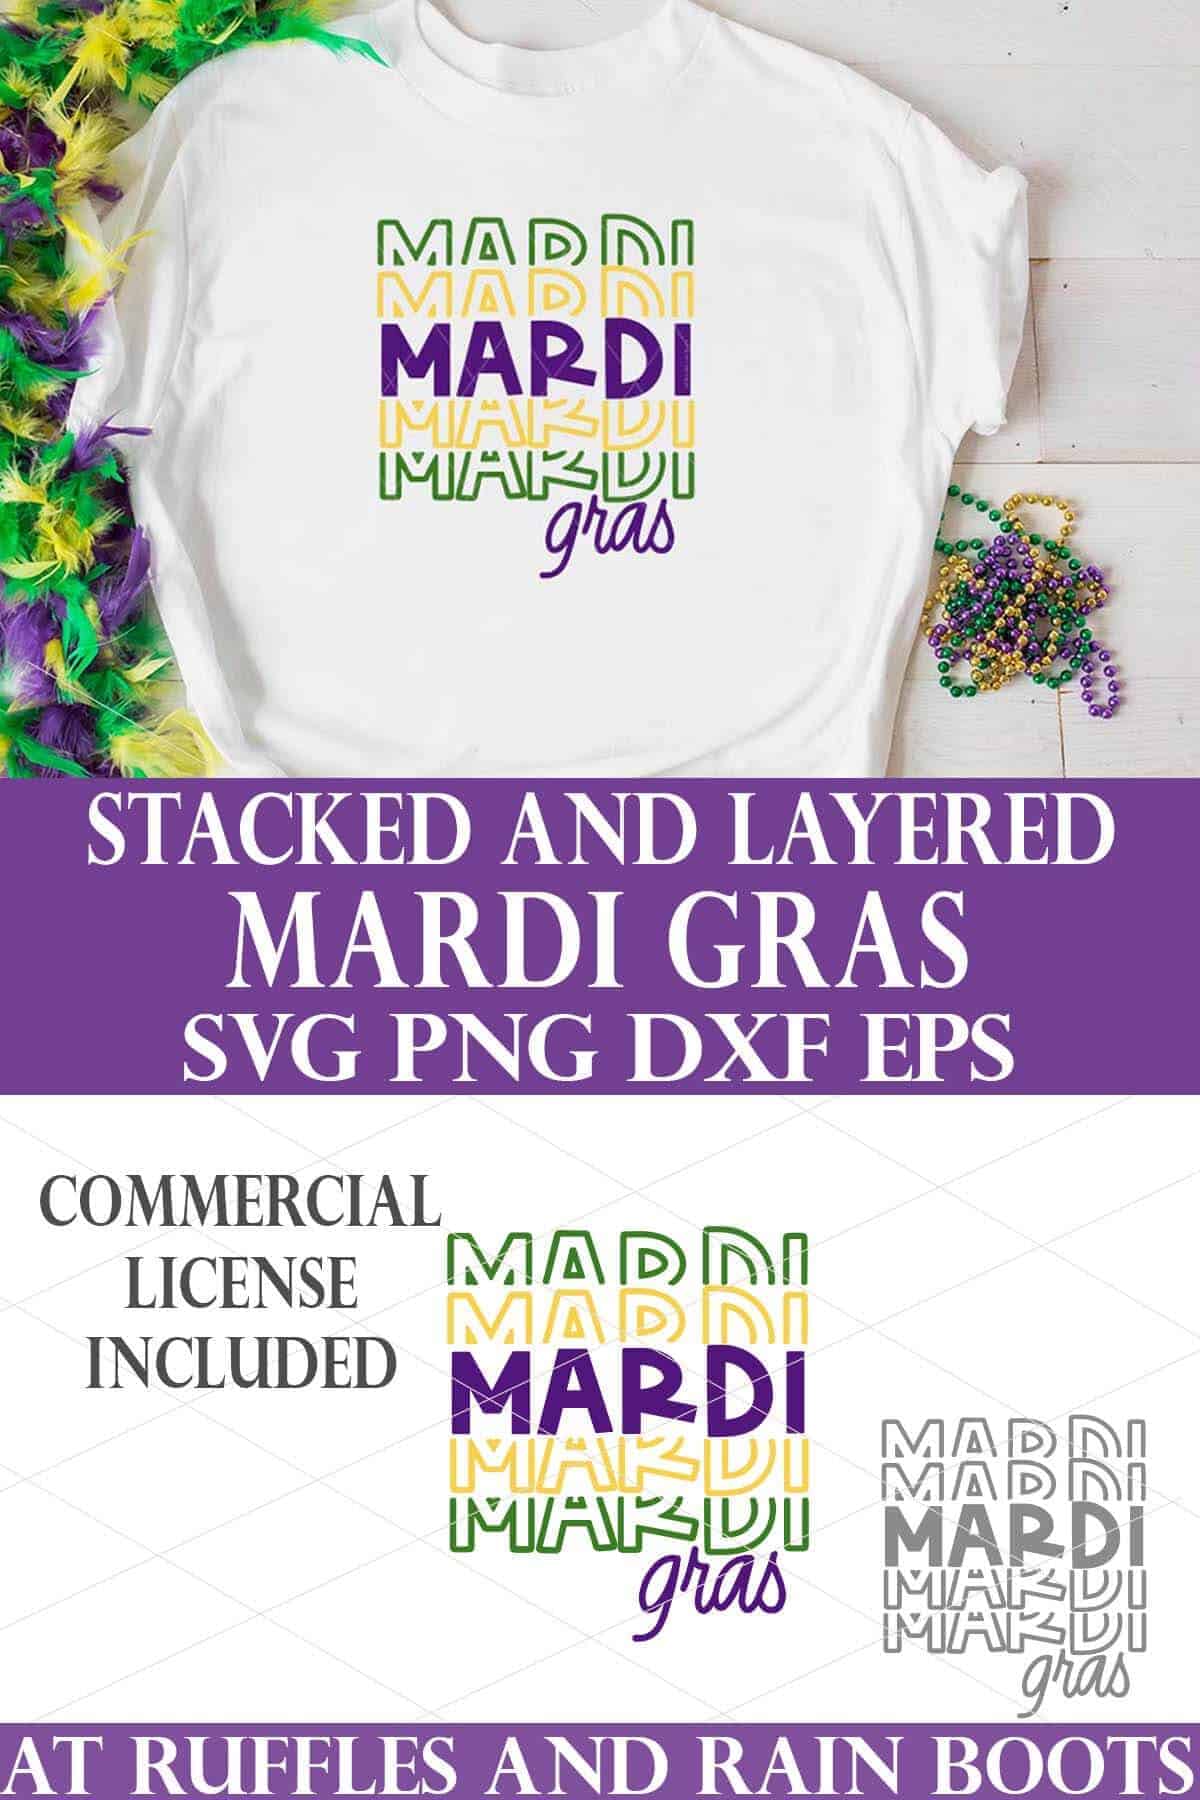 stacked image of mardi gras svg on bottom and green yellow and purple mardi gras in a stacked layered design in vinyl on a white t shirt on wood background with mardi gras beads.